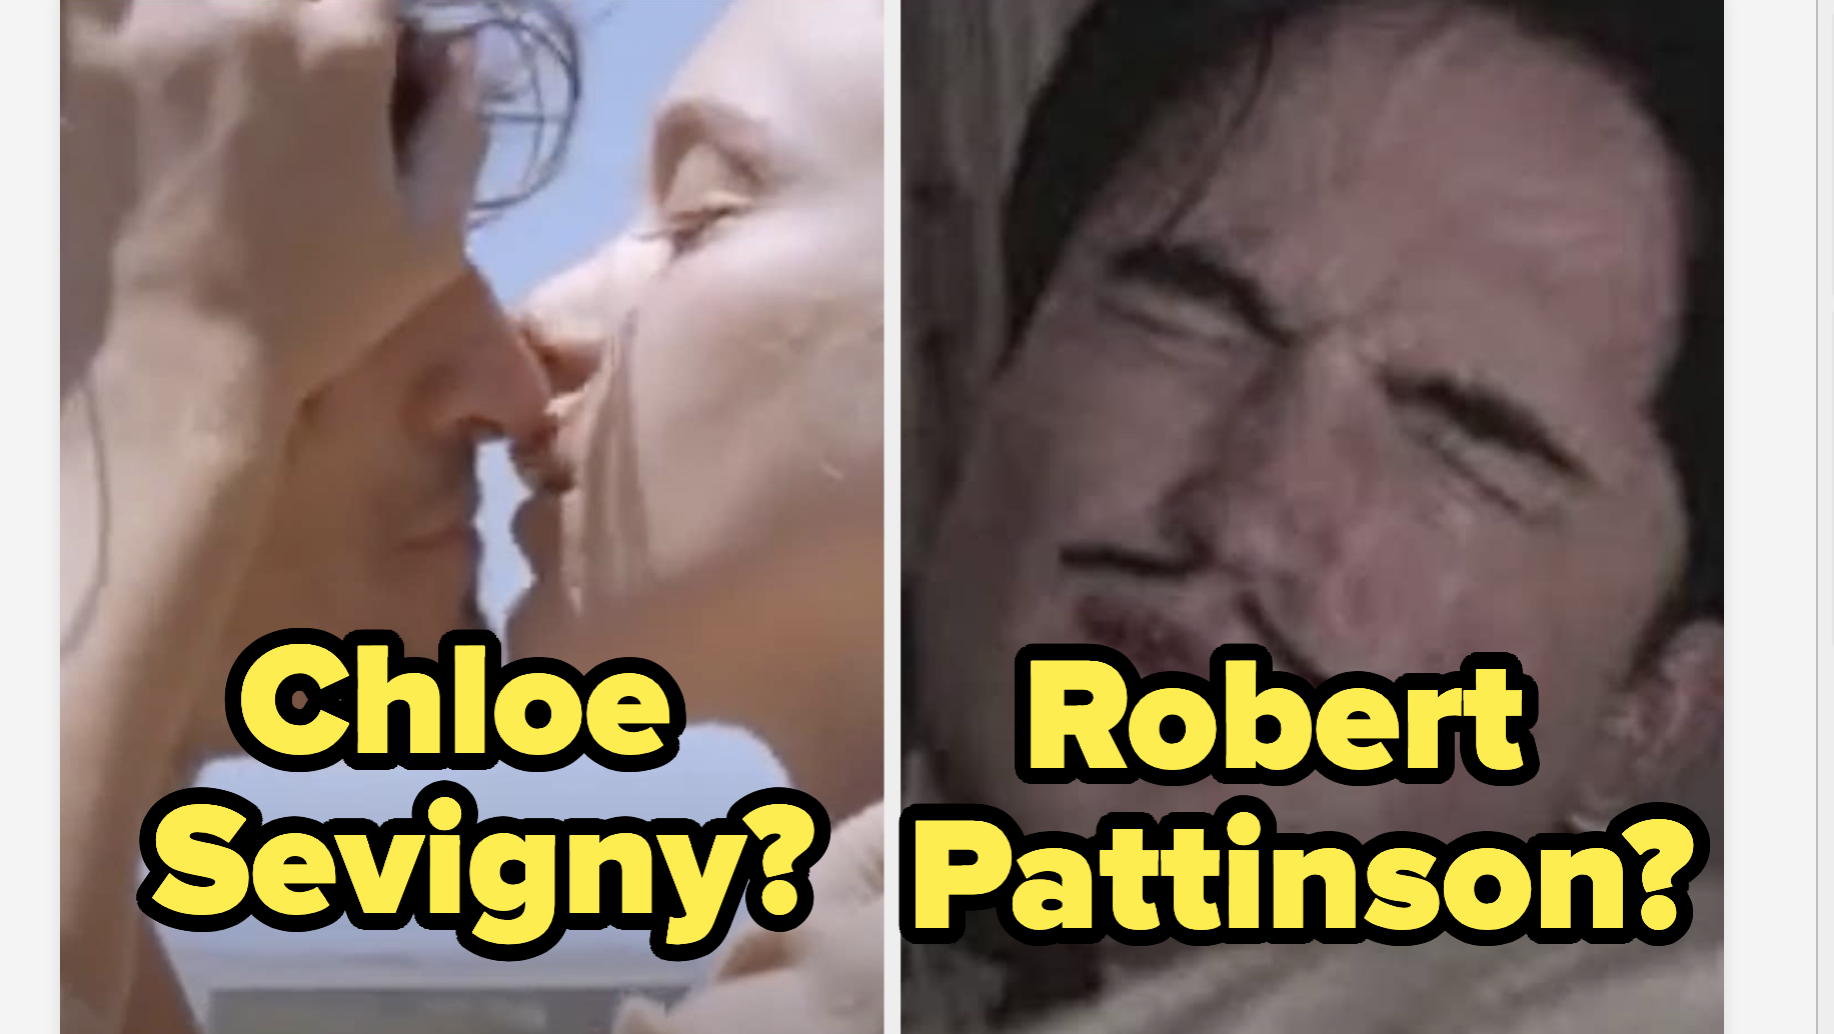 10 Movies Where The Stars Had Real Sex Onscreen image pic